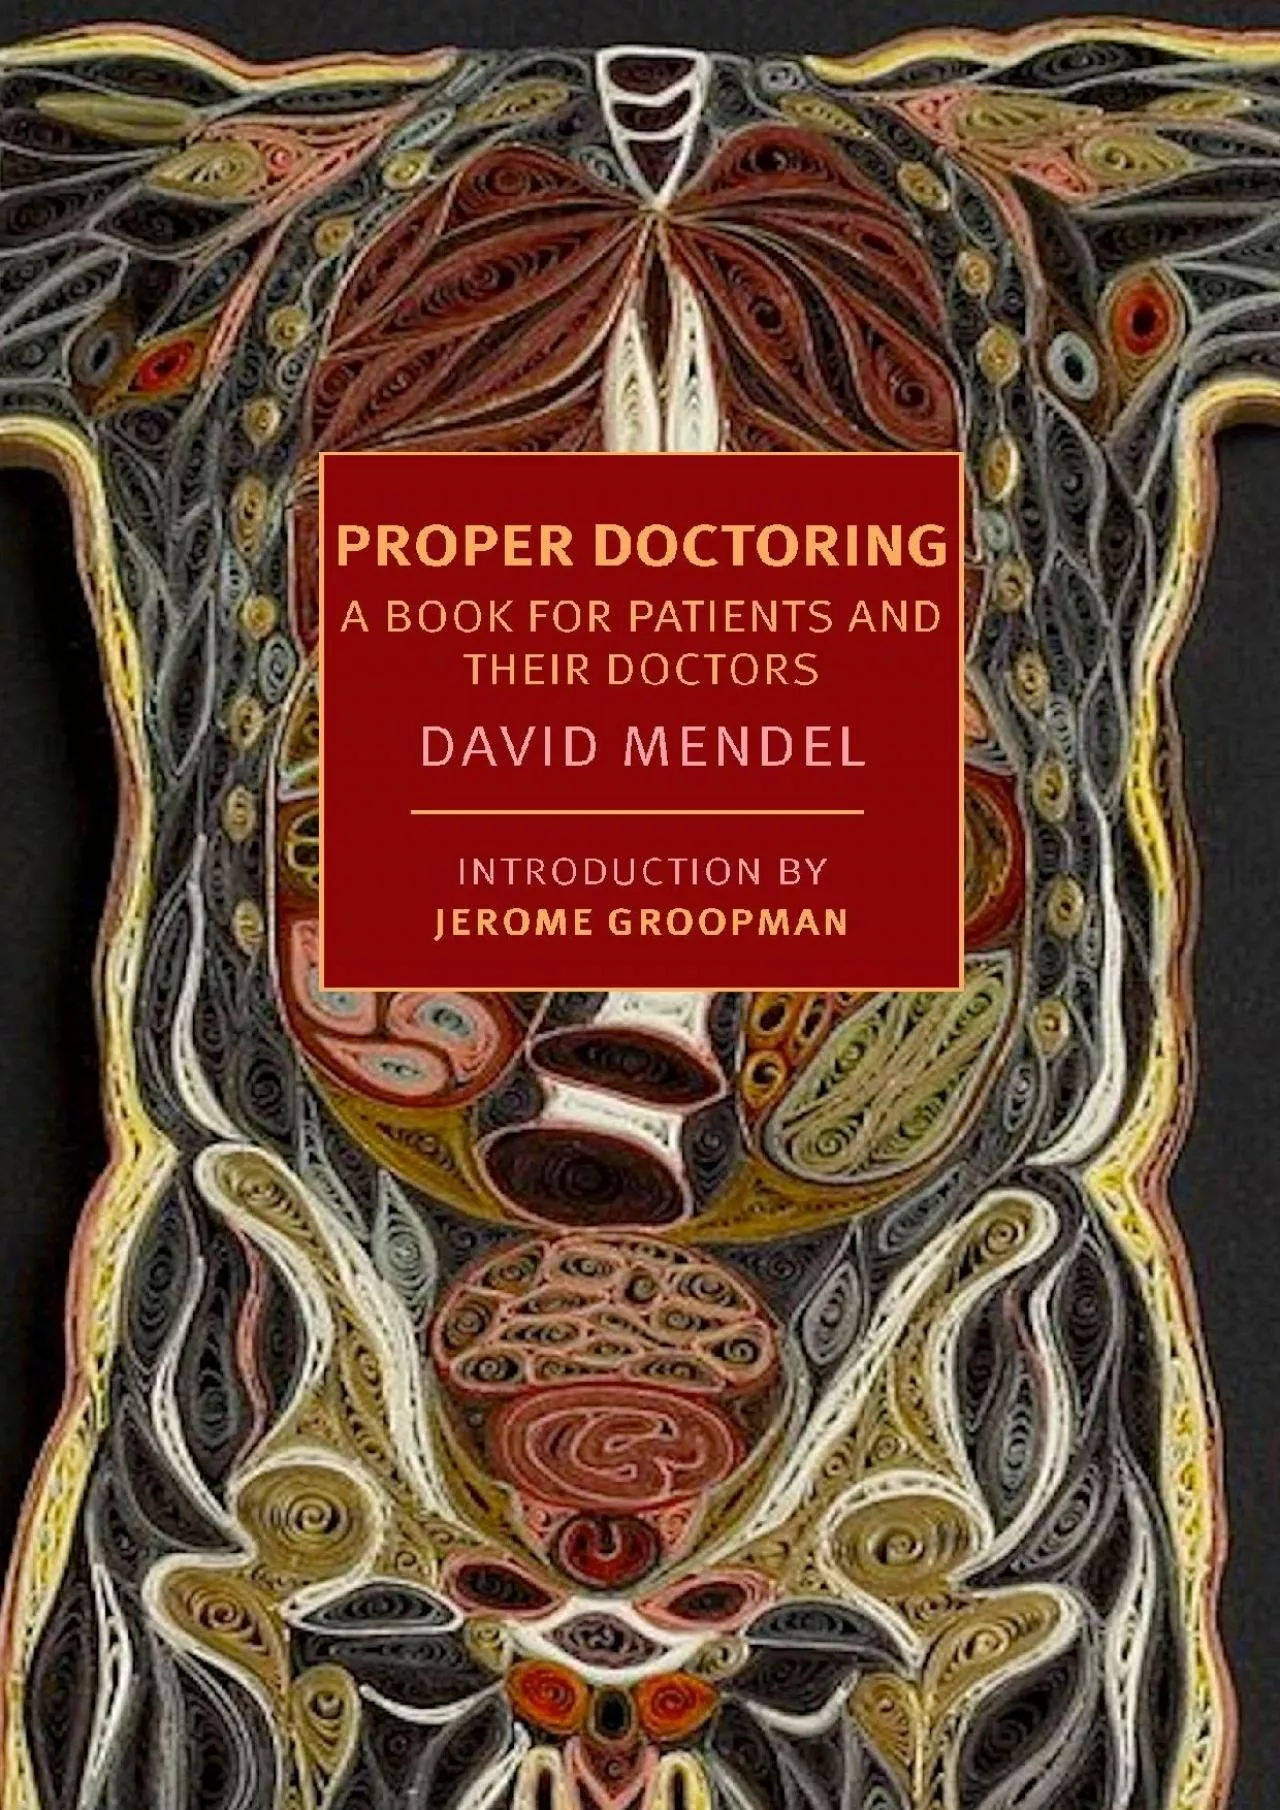 (EBOOK)-Proper Doctoring: A Book for Patients and their Doctors (New York Review Books